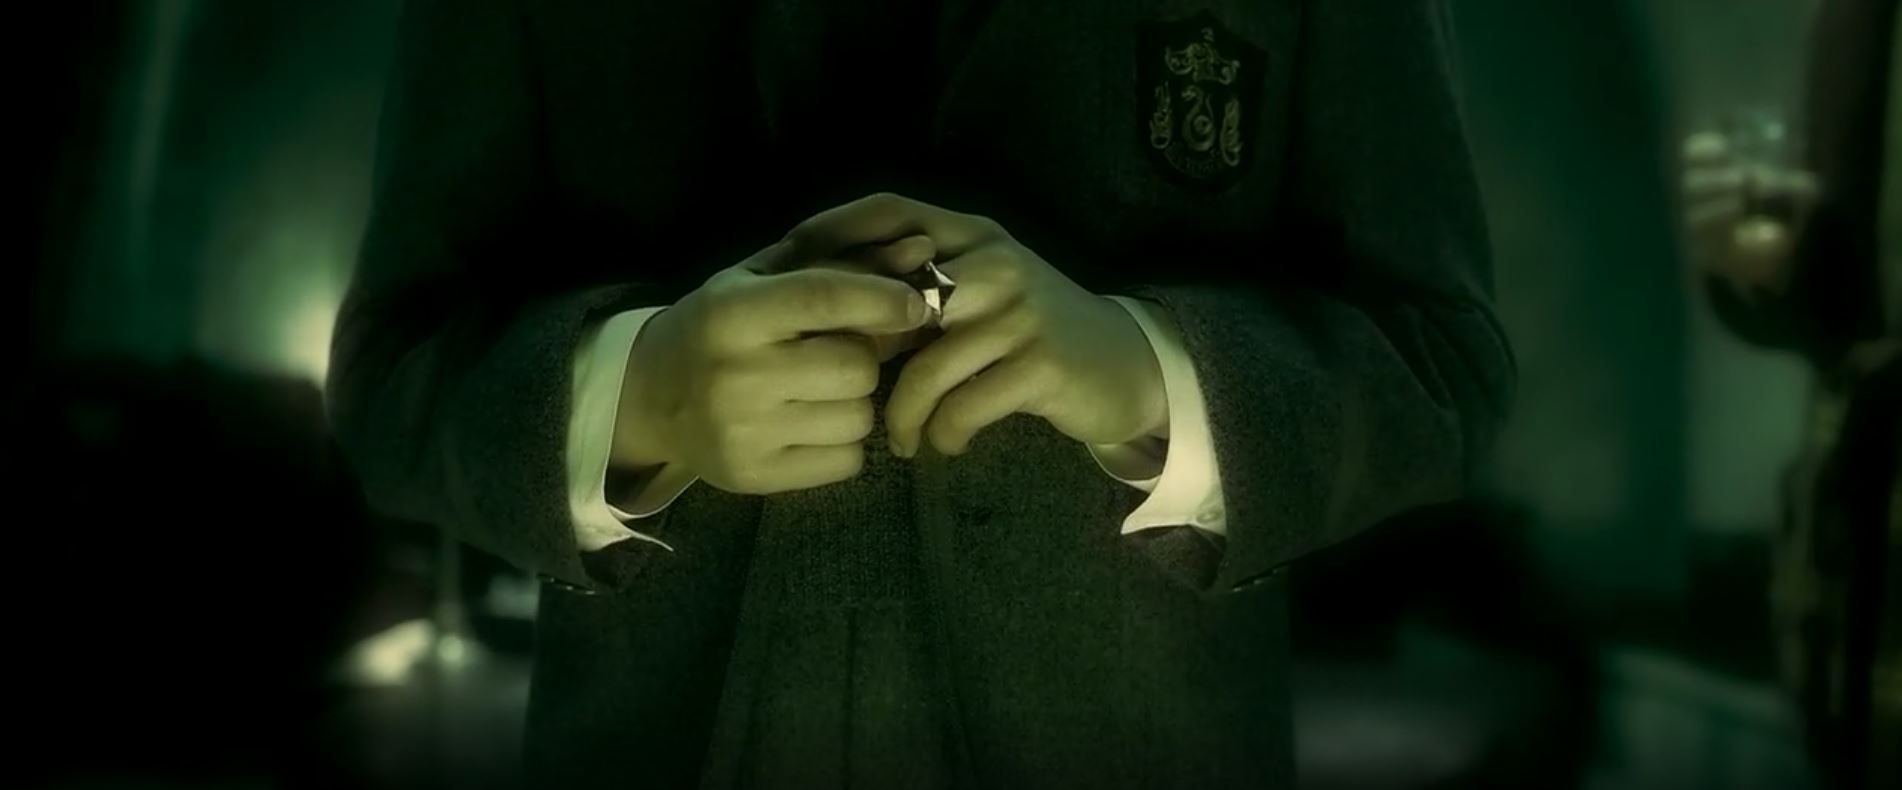 15 Things You Didn’t Know About Tom Riddle (Before He Was Voldemort)